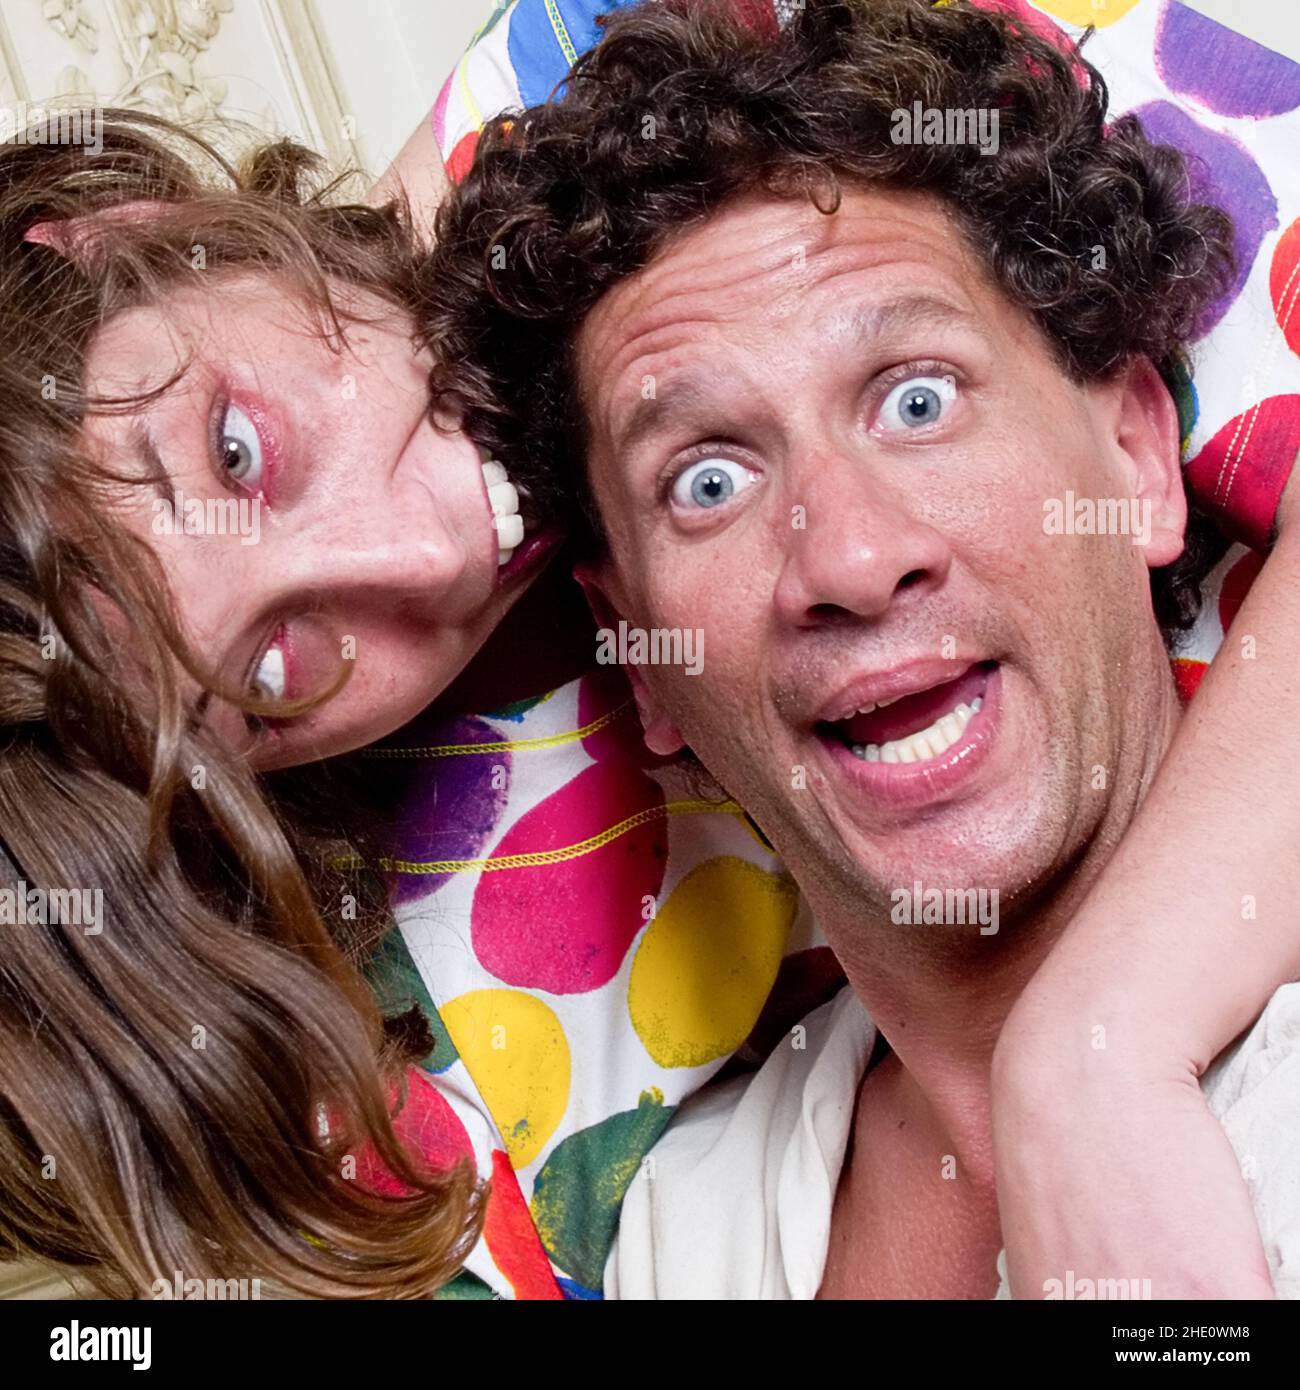 Model couple  posing , acting crazy in an institutional setting Stock Photo